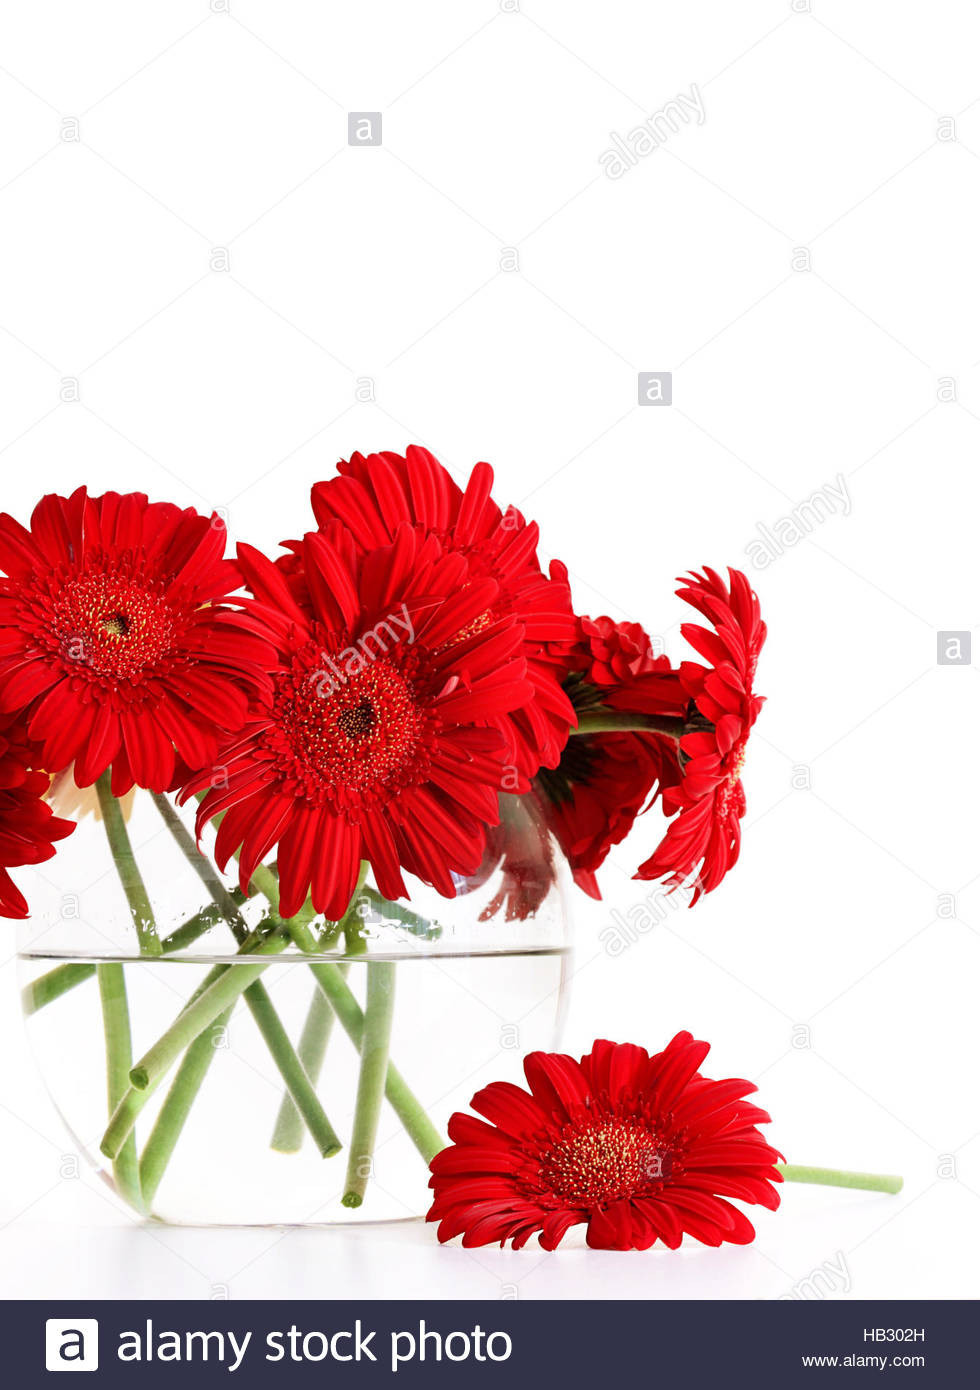 10 Stylish Hot Pink Flower Vases 2024 free download hot pink flower vases of red glass vase pictures red artificial flowers imposing vases throughout red glass vase pics closeup od red gerber daisies in glass vase stock of red glass